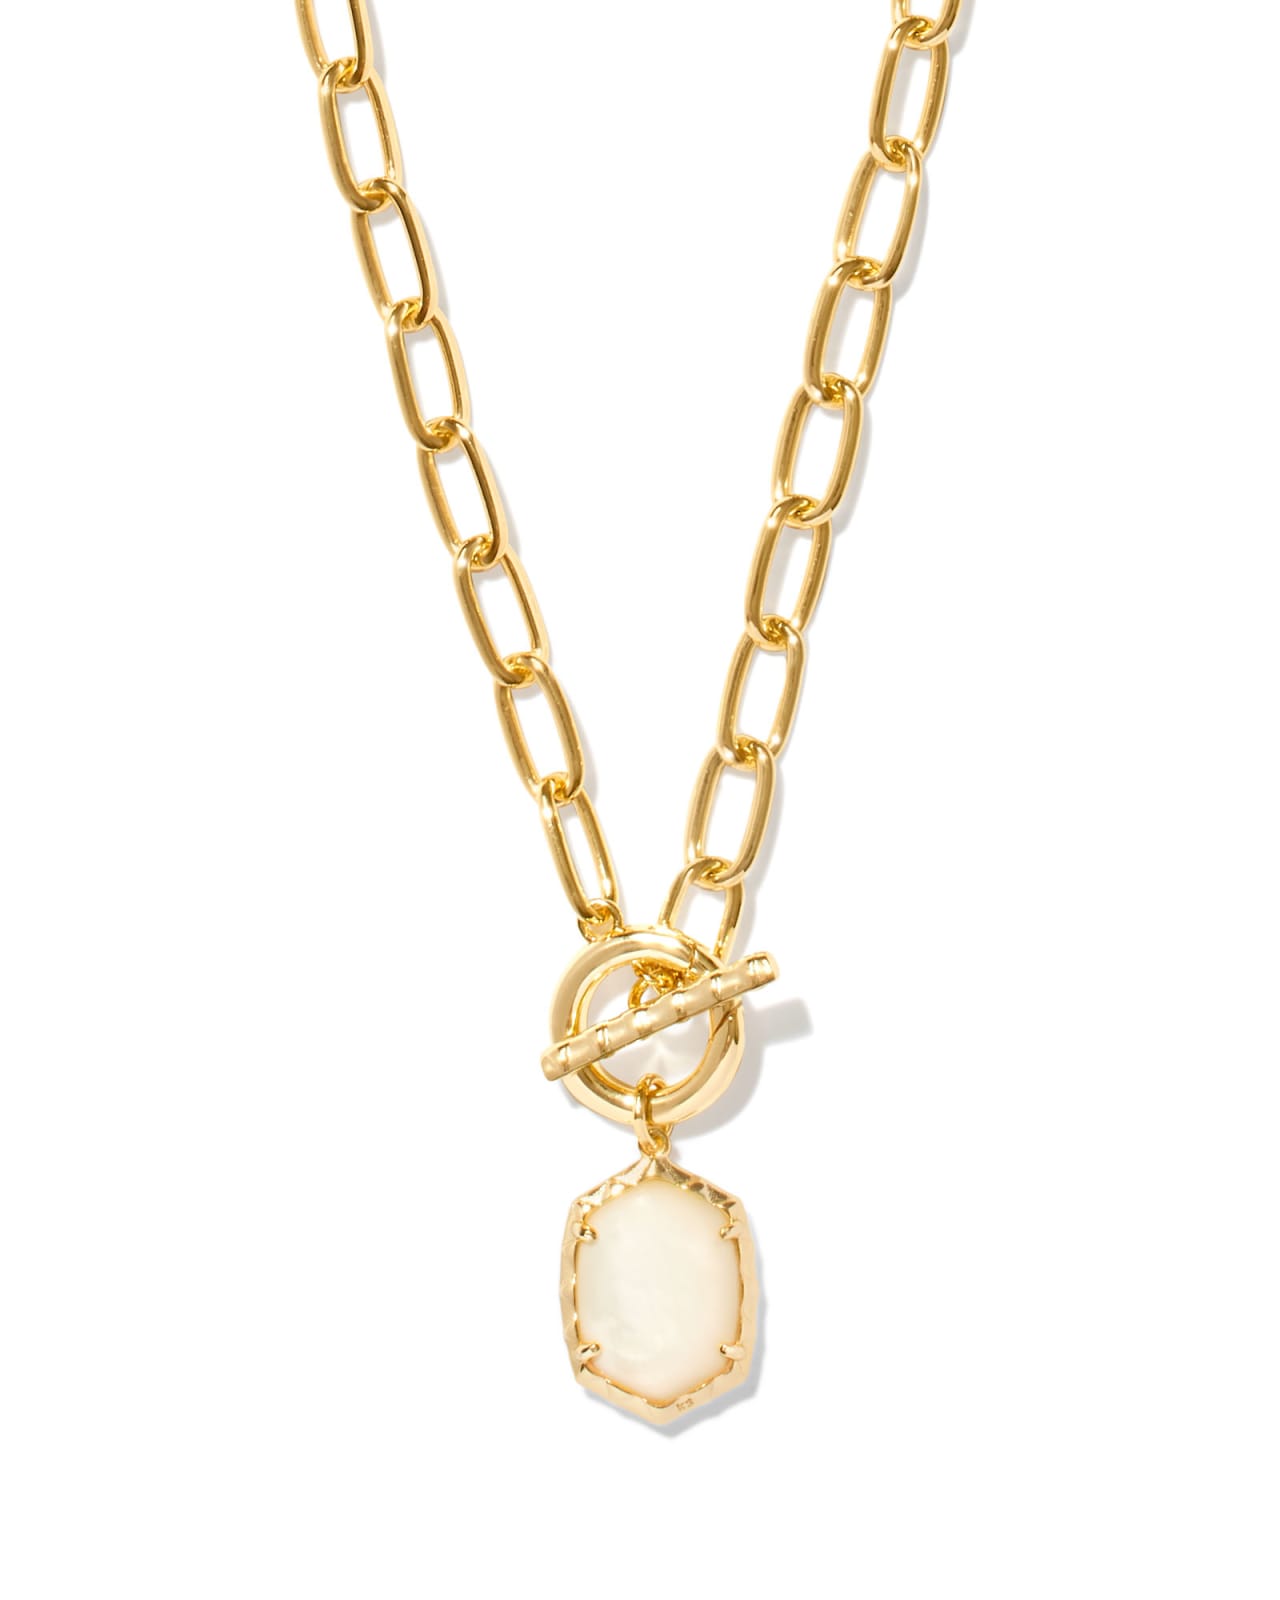 Daphne Convertible Gold Link and Chain Necklace in Ivory Mother-of-Pearl | Kendra Scott